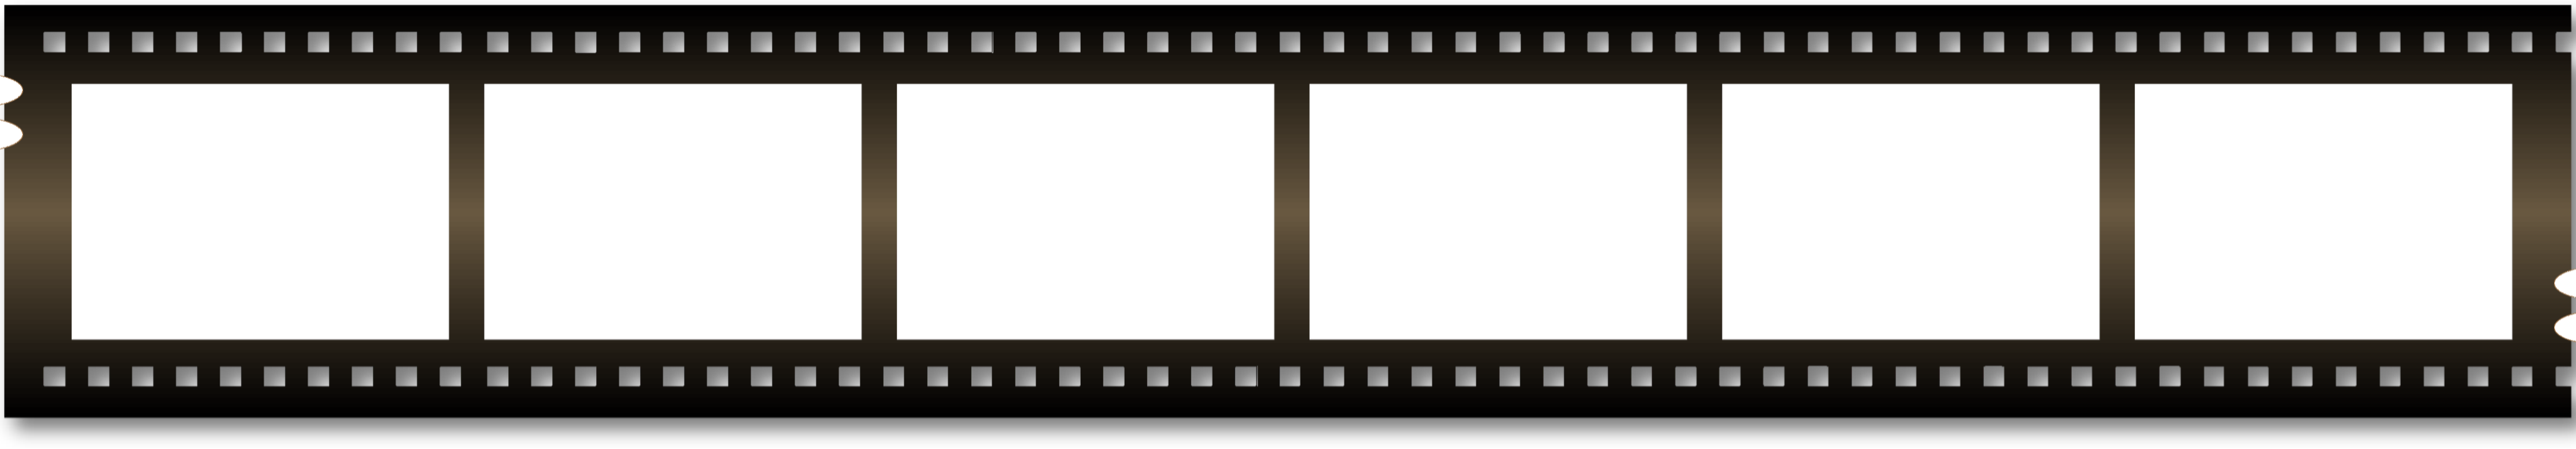 Download Movie Reel Gallery For Blank Film Strip Clipart PNG Free